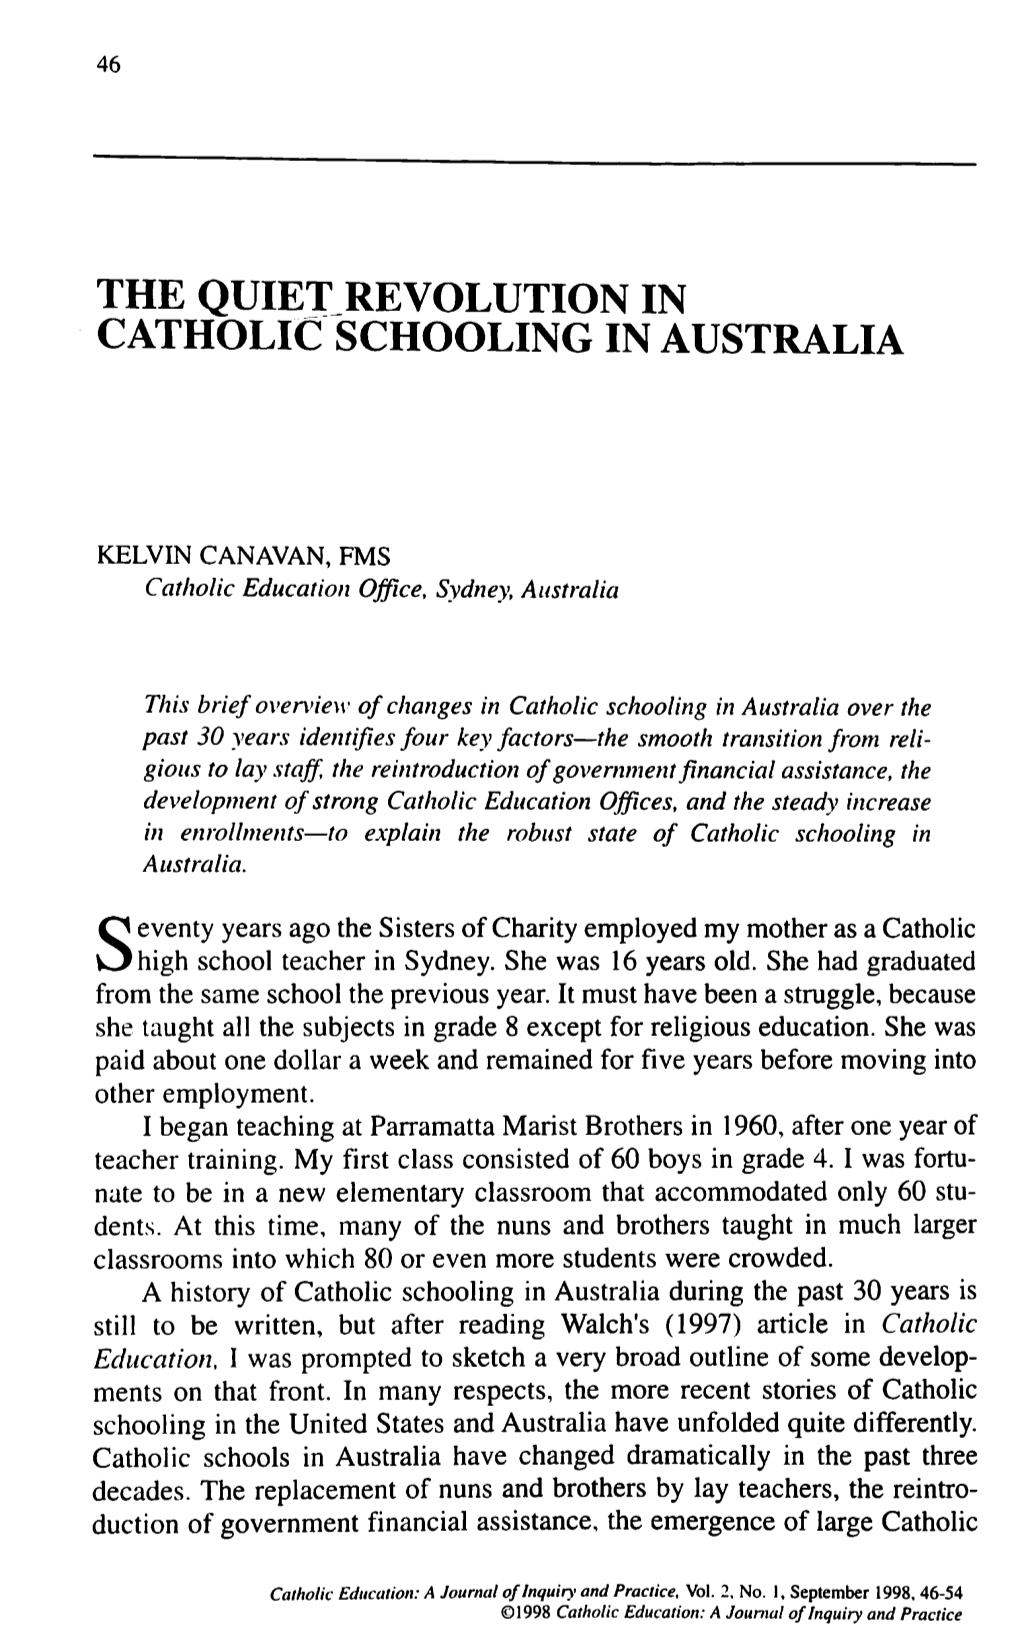 Catholic Education. I Was Prompted to Sketch a Very Broad Outline of Some Develop- Ments on That Front